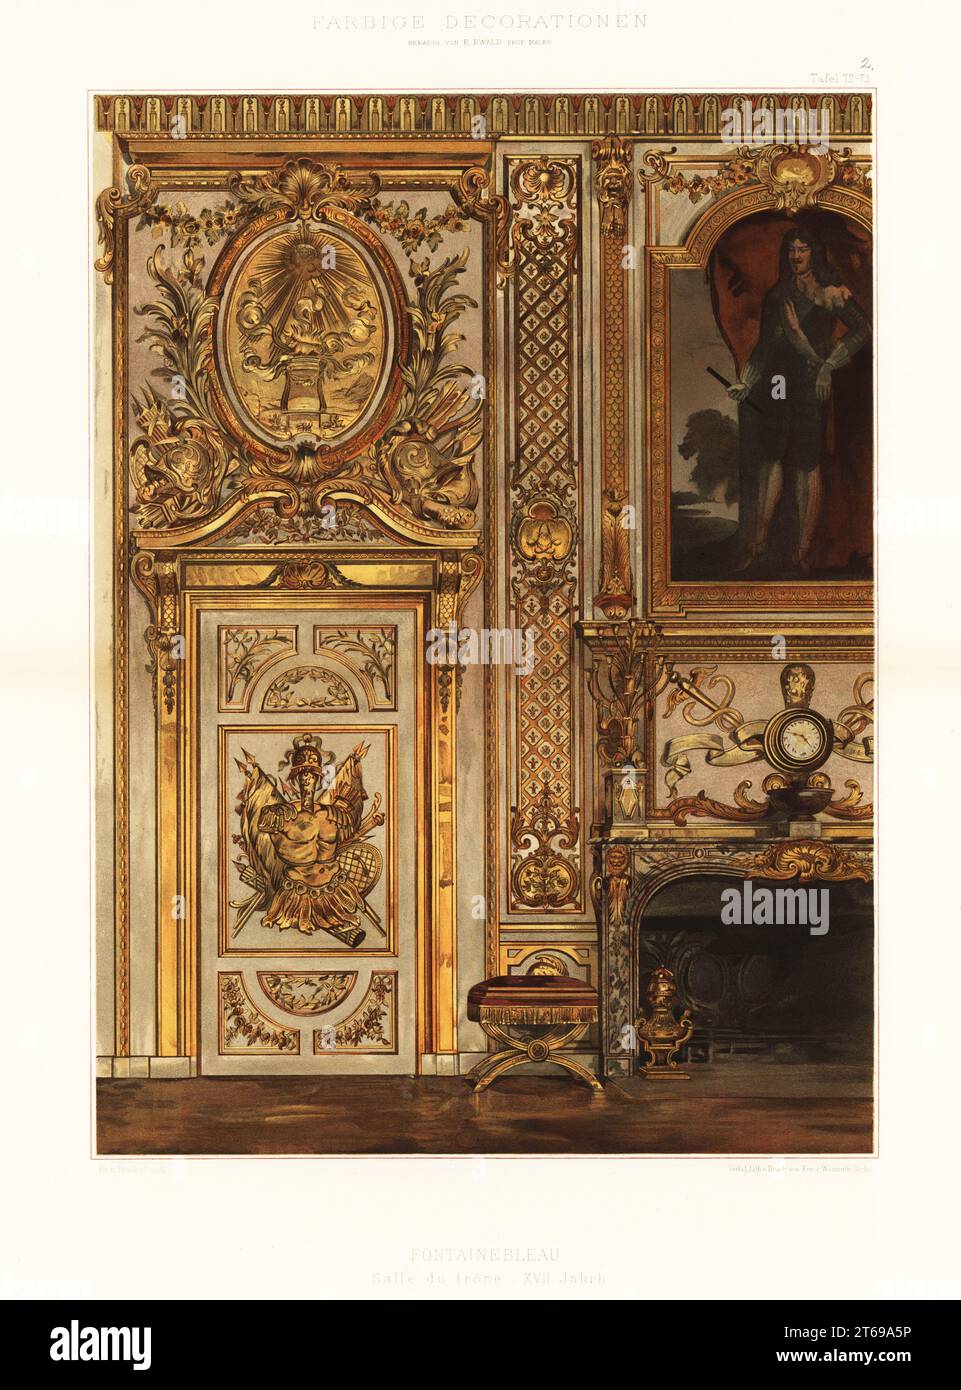 Throne room in the Palace of Fontainebleau, 17th century. Salle du trone, Chateau de Fontainebleau, XVII Jahrh. Chromolithograph by Richard Hendorf from Ernst Ewalds Farbige decorationen, alter und never Zeit (Color decoration, ancient and new eras), Ernst Wasmuth, Berlin, 1889. Stock Photo